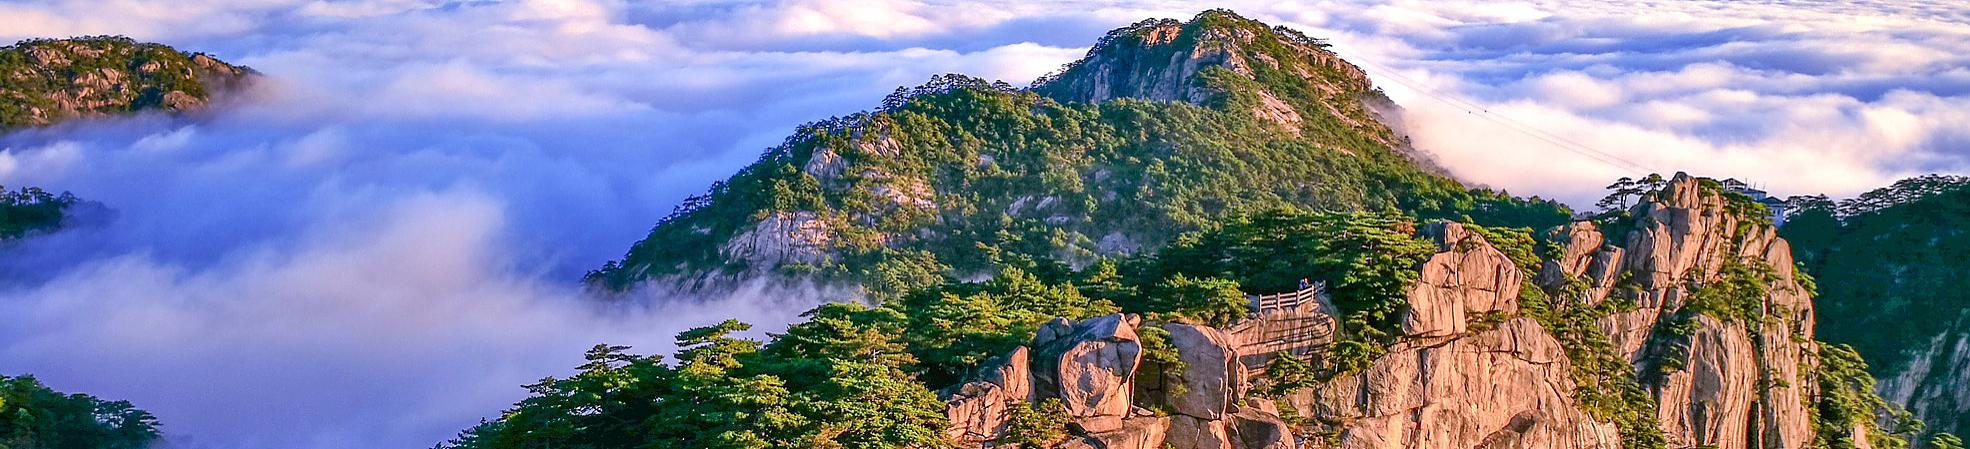 West Sea Scenic Zone of Huangshan Mountain